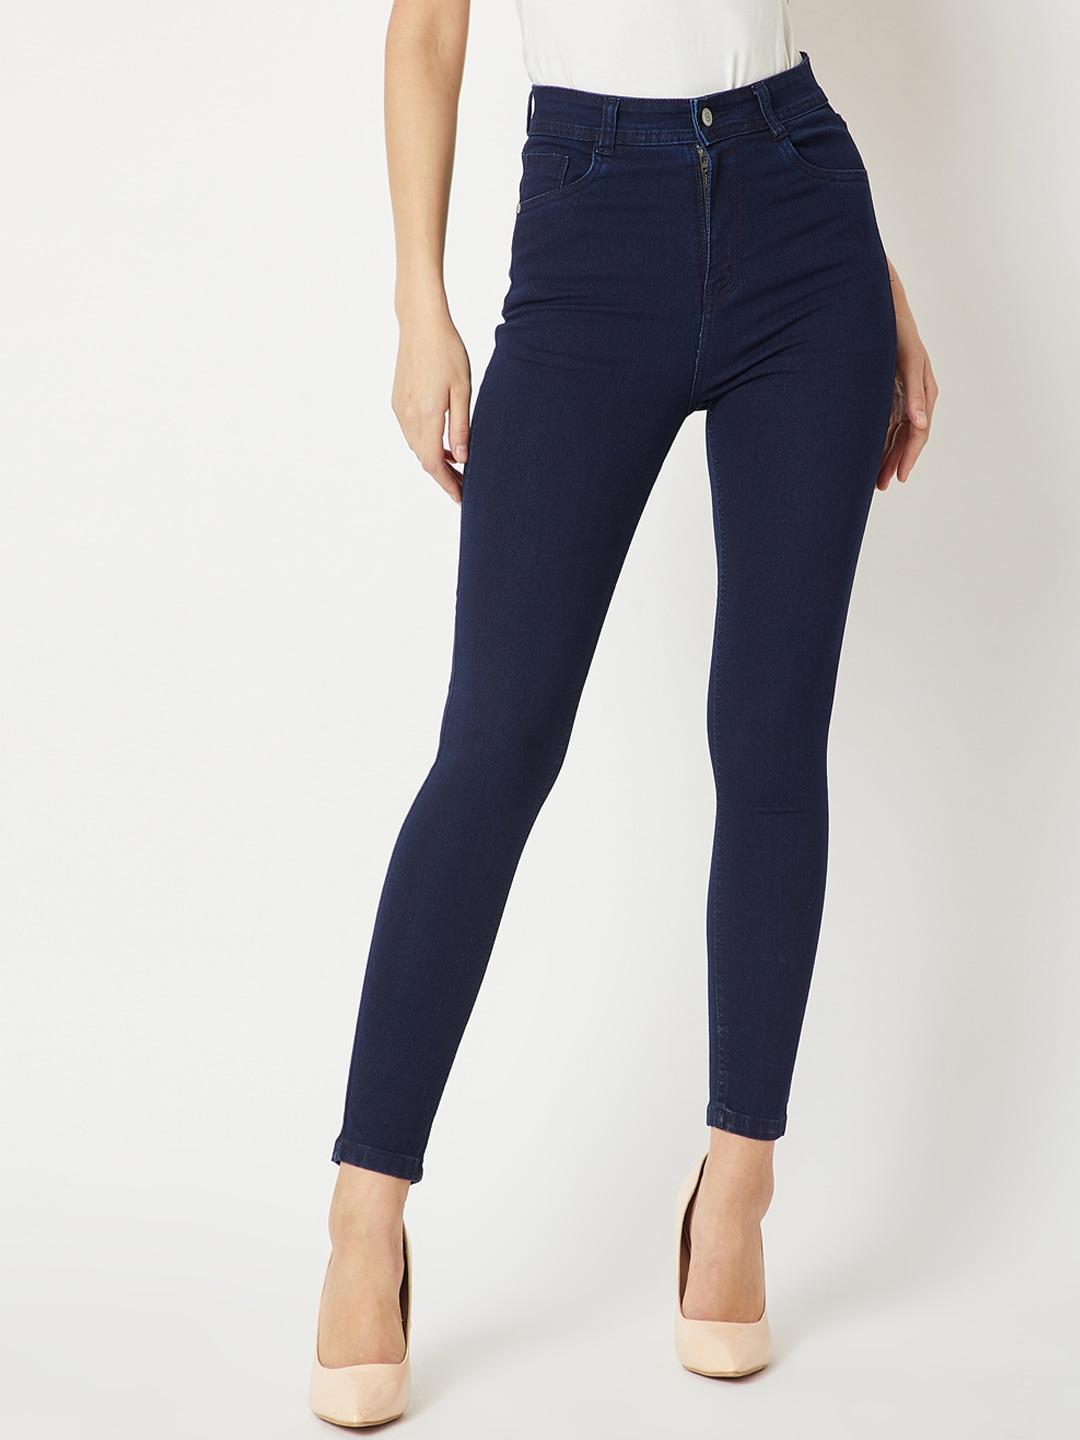 miss-chase-women-navy-blue-slim-fit-high-rise-clean-look-jeans